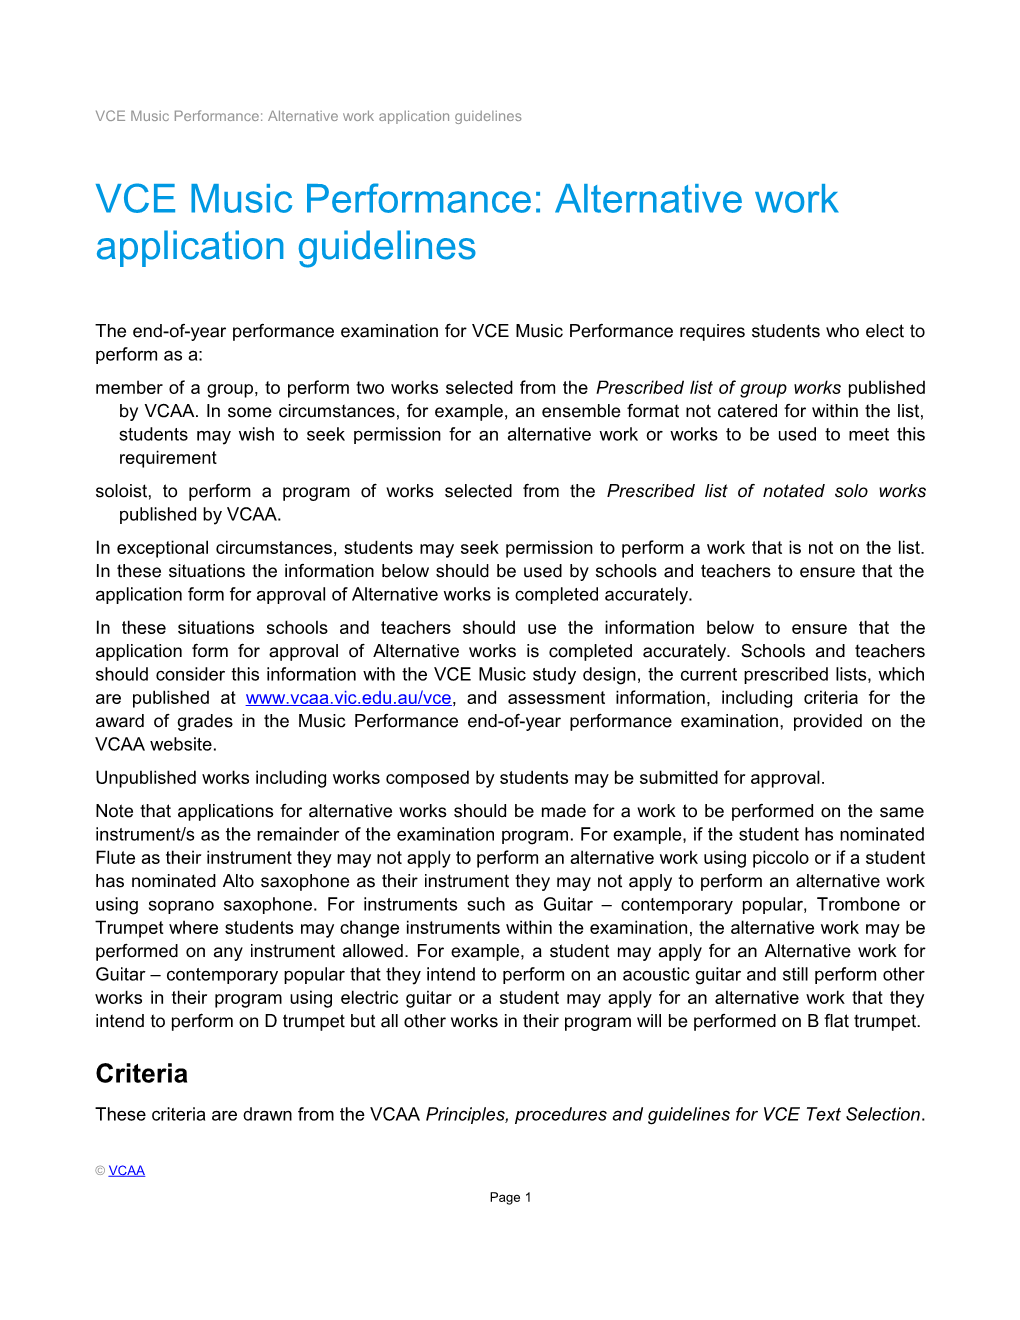 VCE Music Performance: Alternative Work Application Guidelines